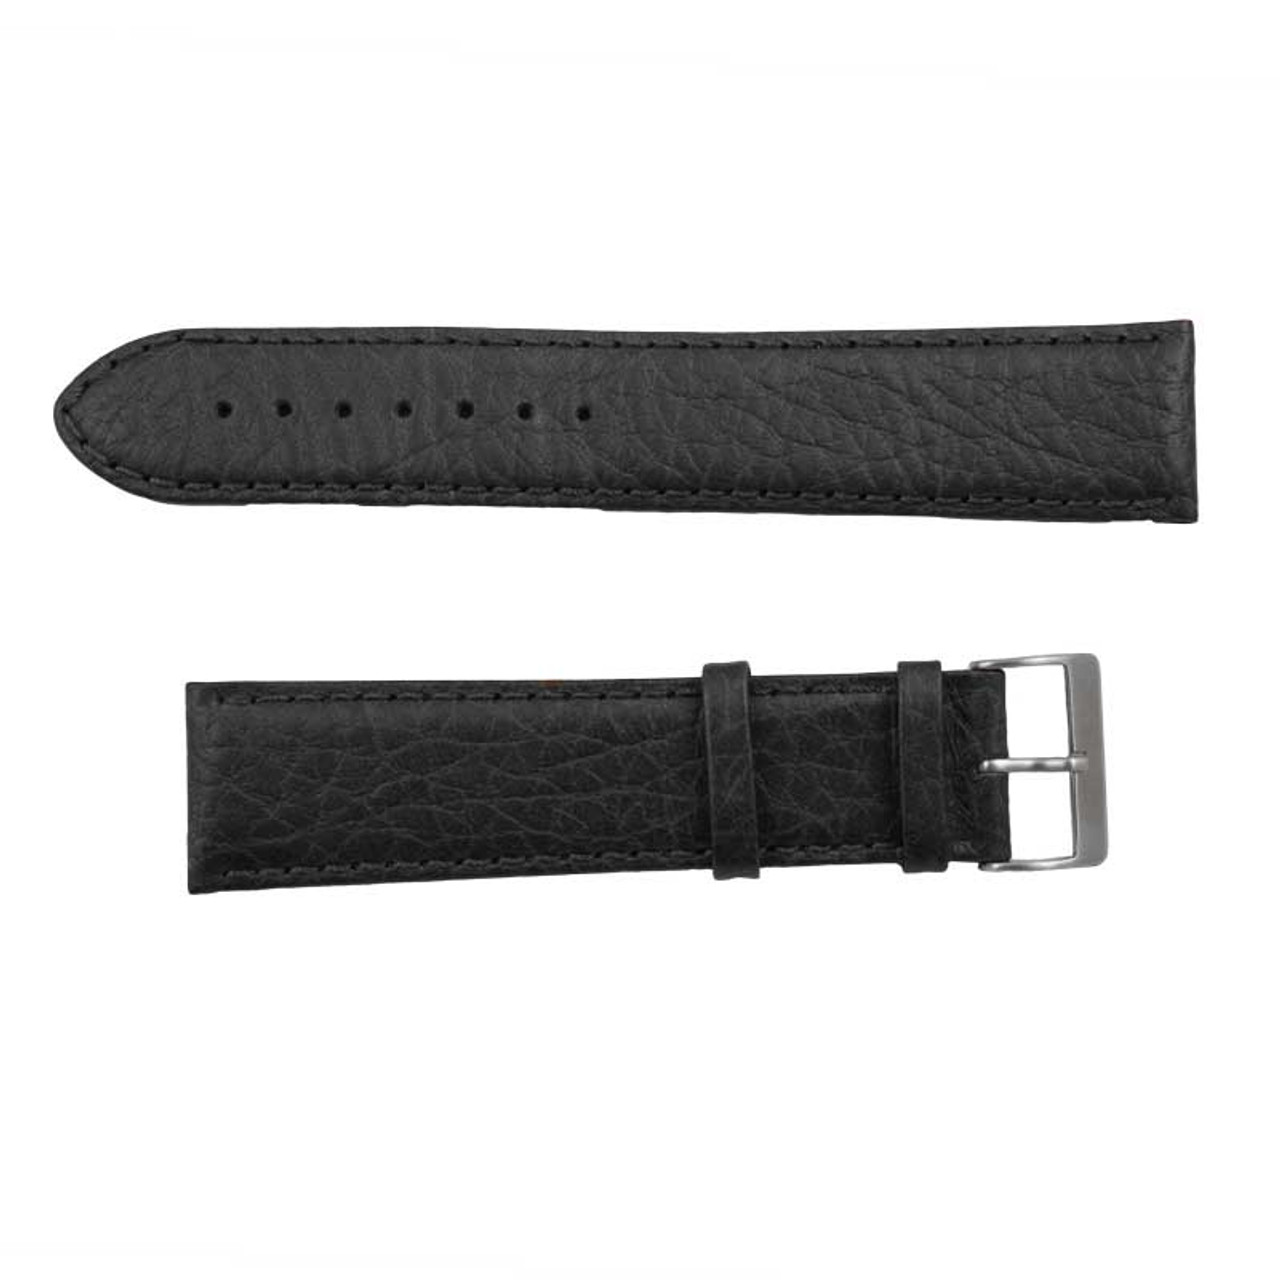 22mm Watch Band Black Distressed Leather 9 Inch Length